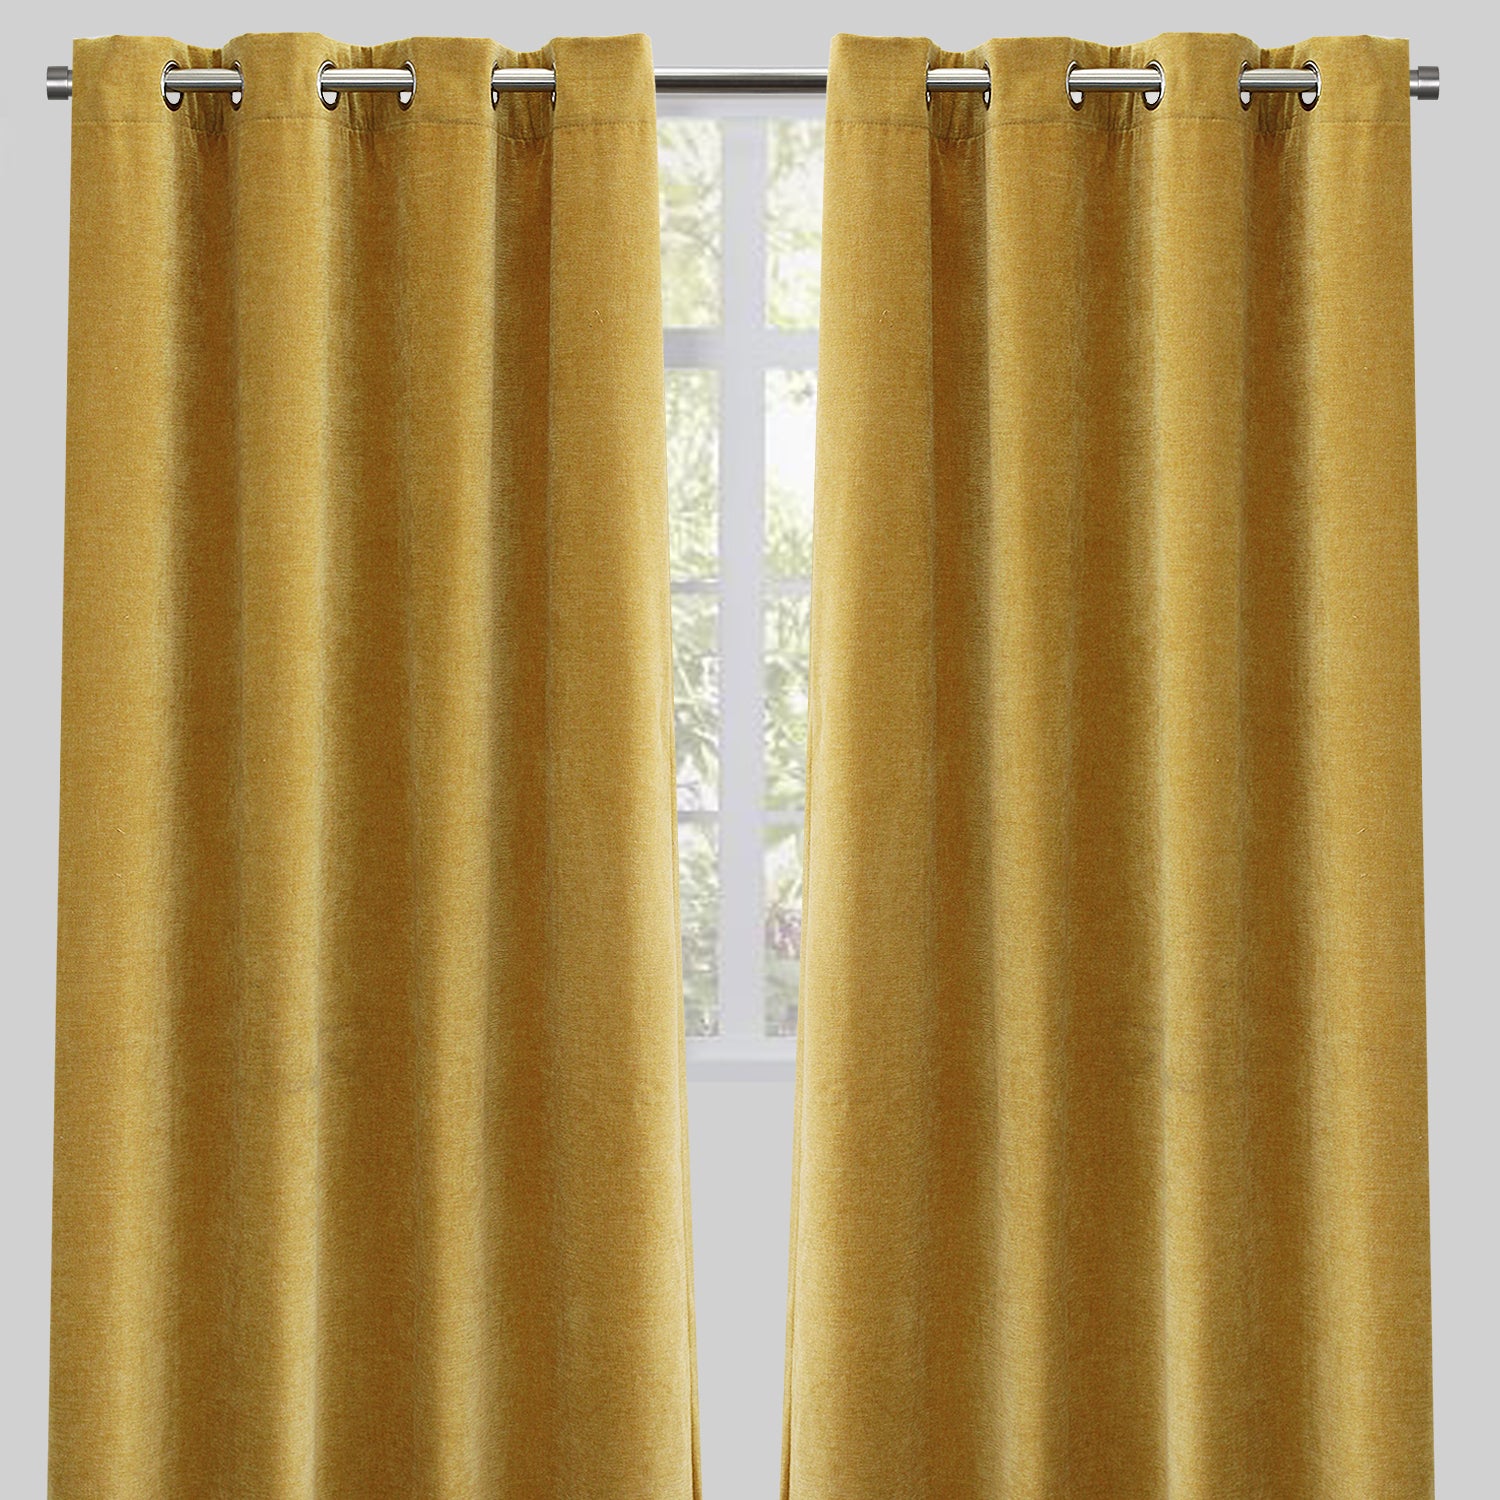 Vargas Curtain Panels | Solid Chenille